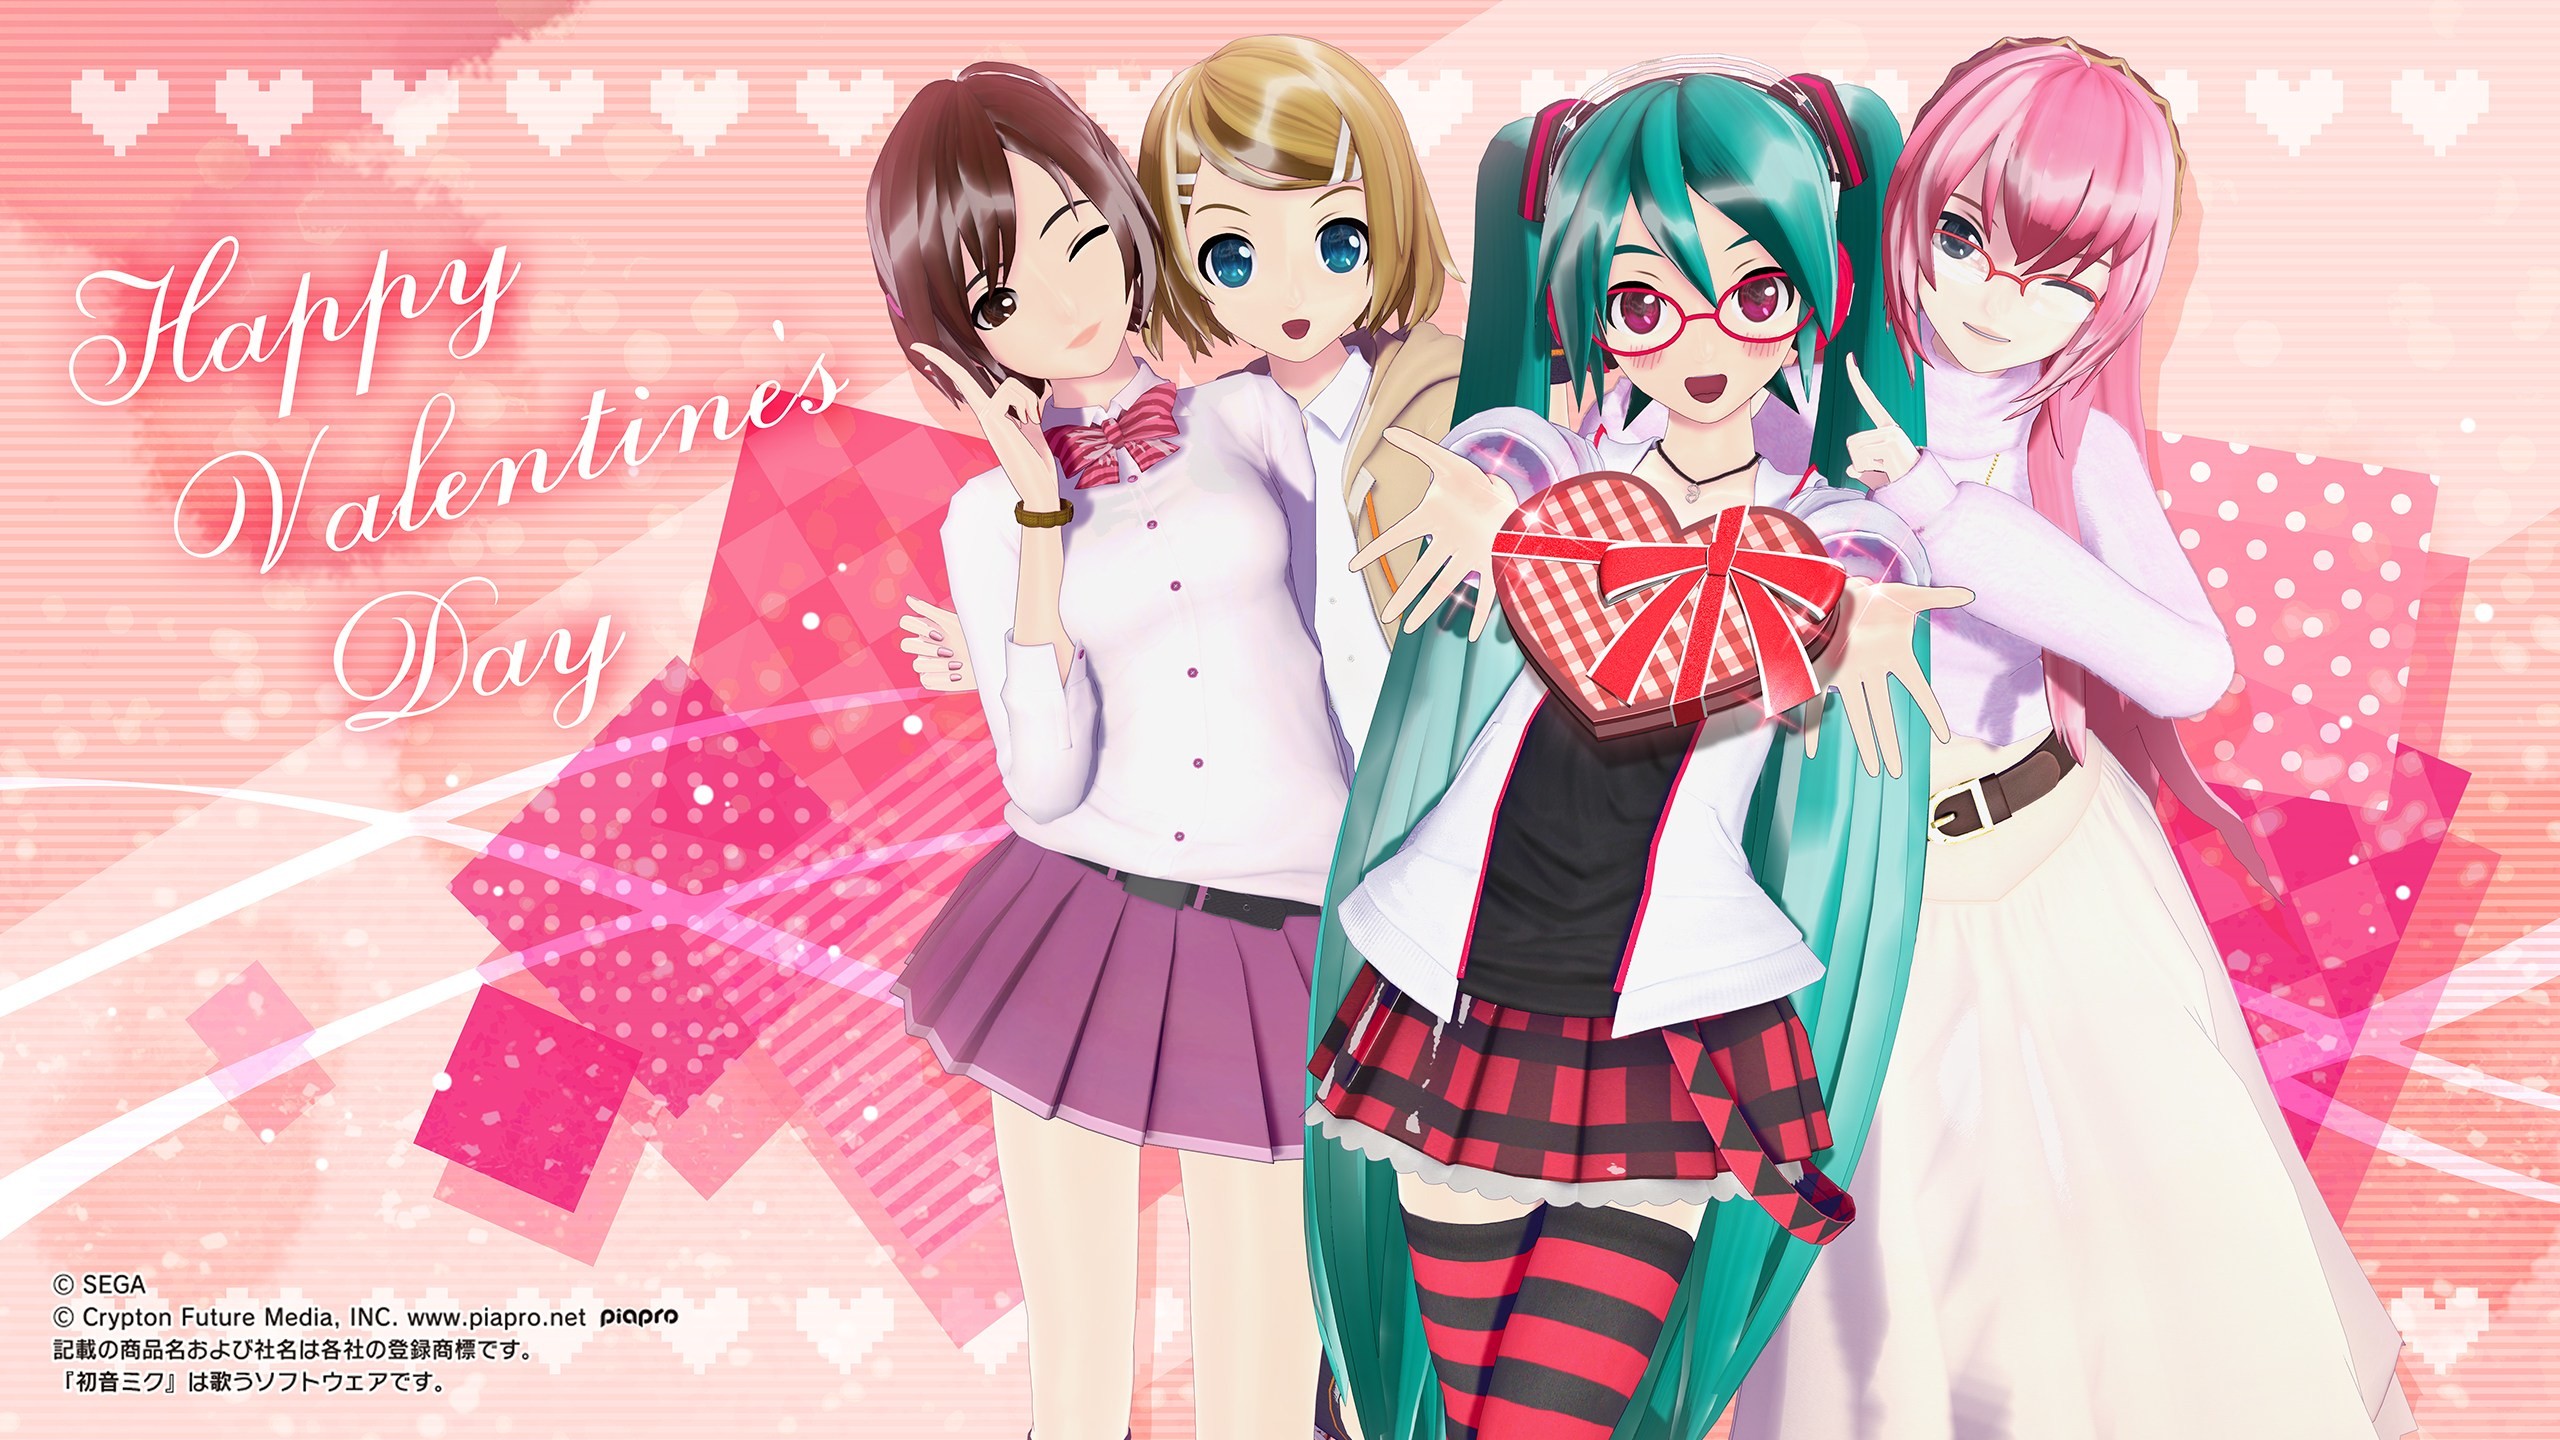 2560x1440 Project DIVA Team Celebrates Valentine's Day With Project DIVA X Video and  Wallpaper